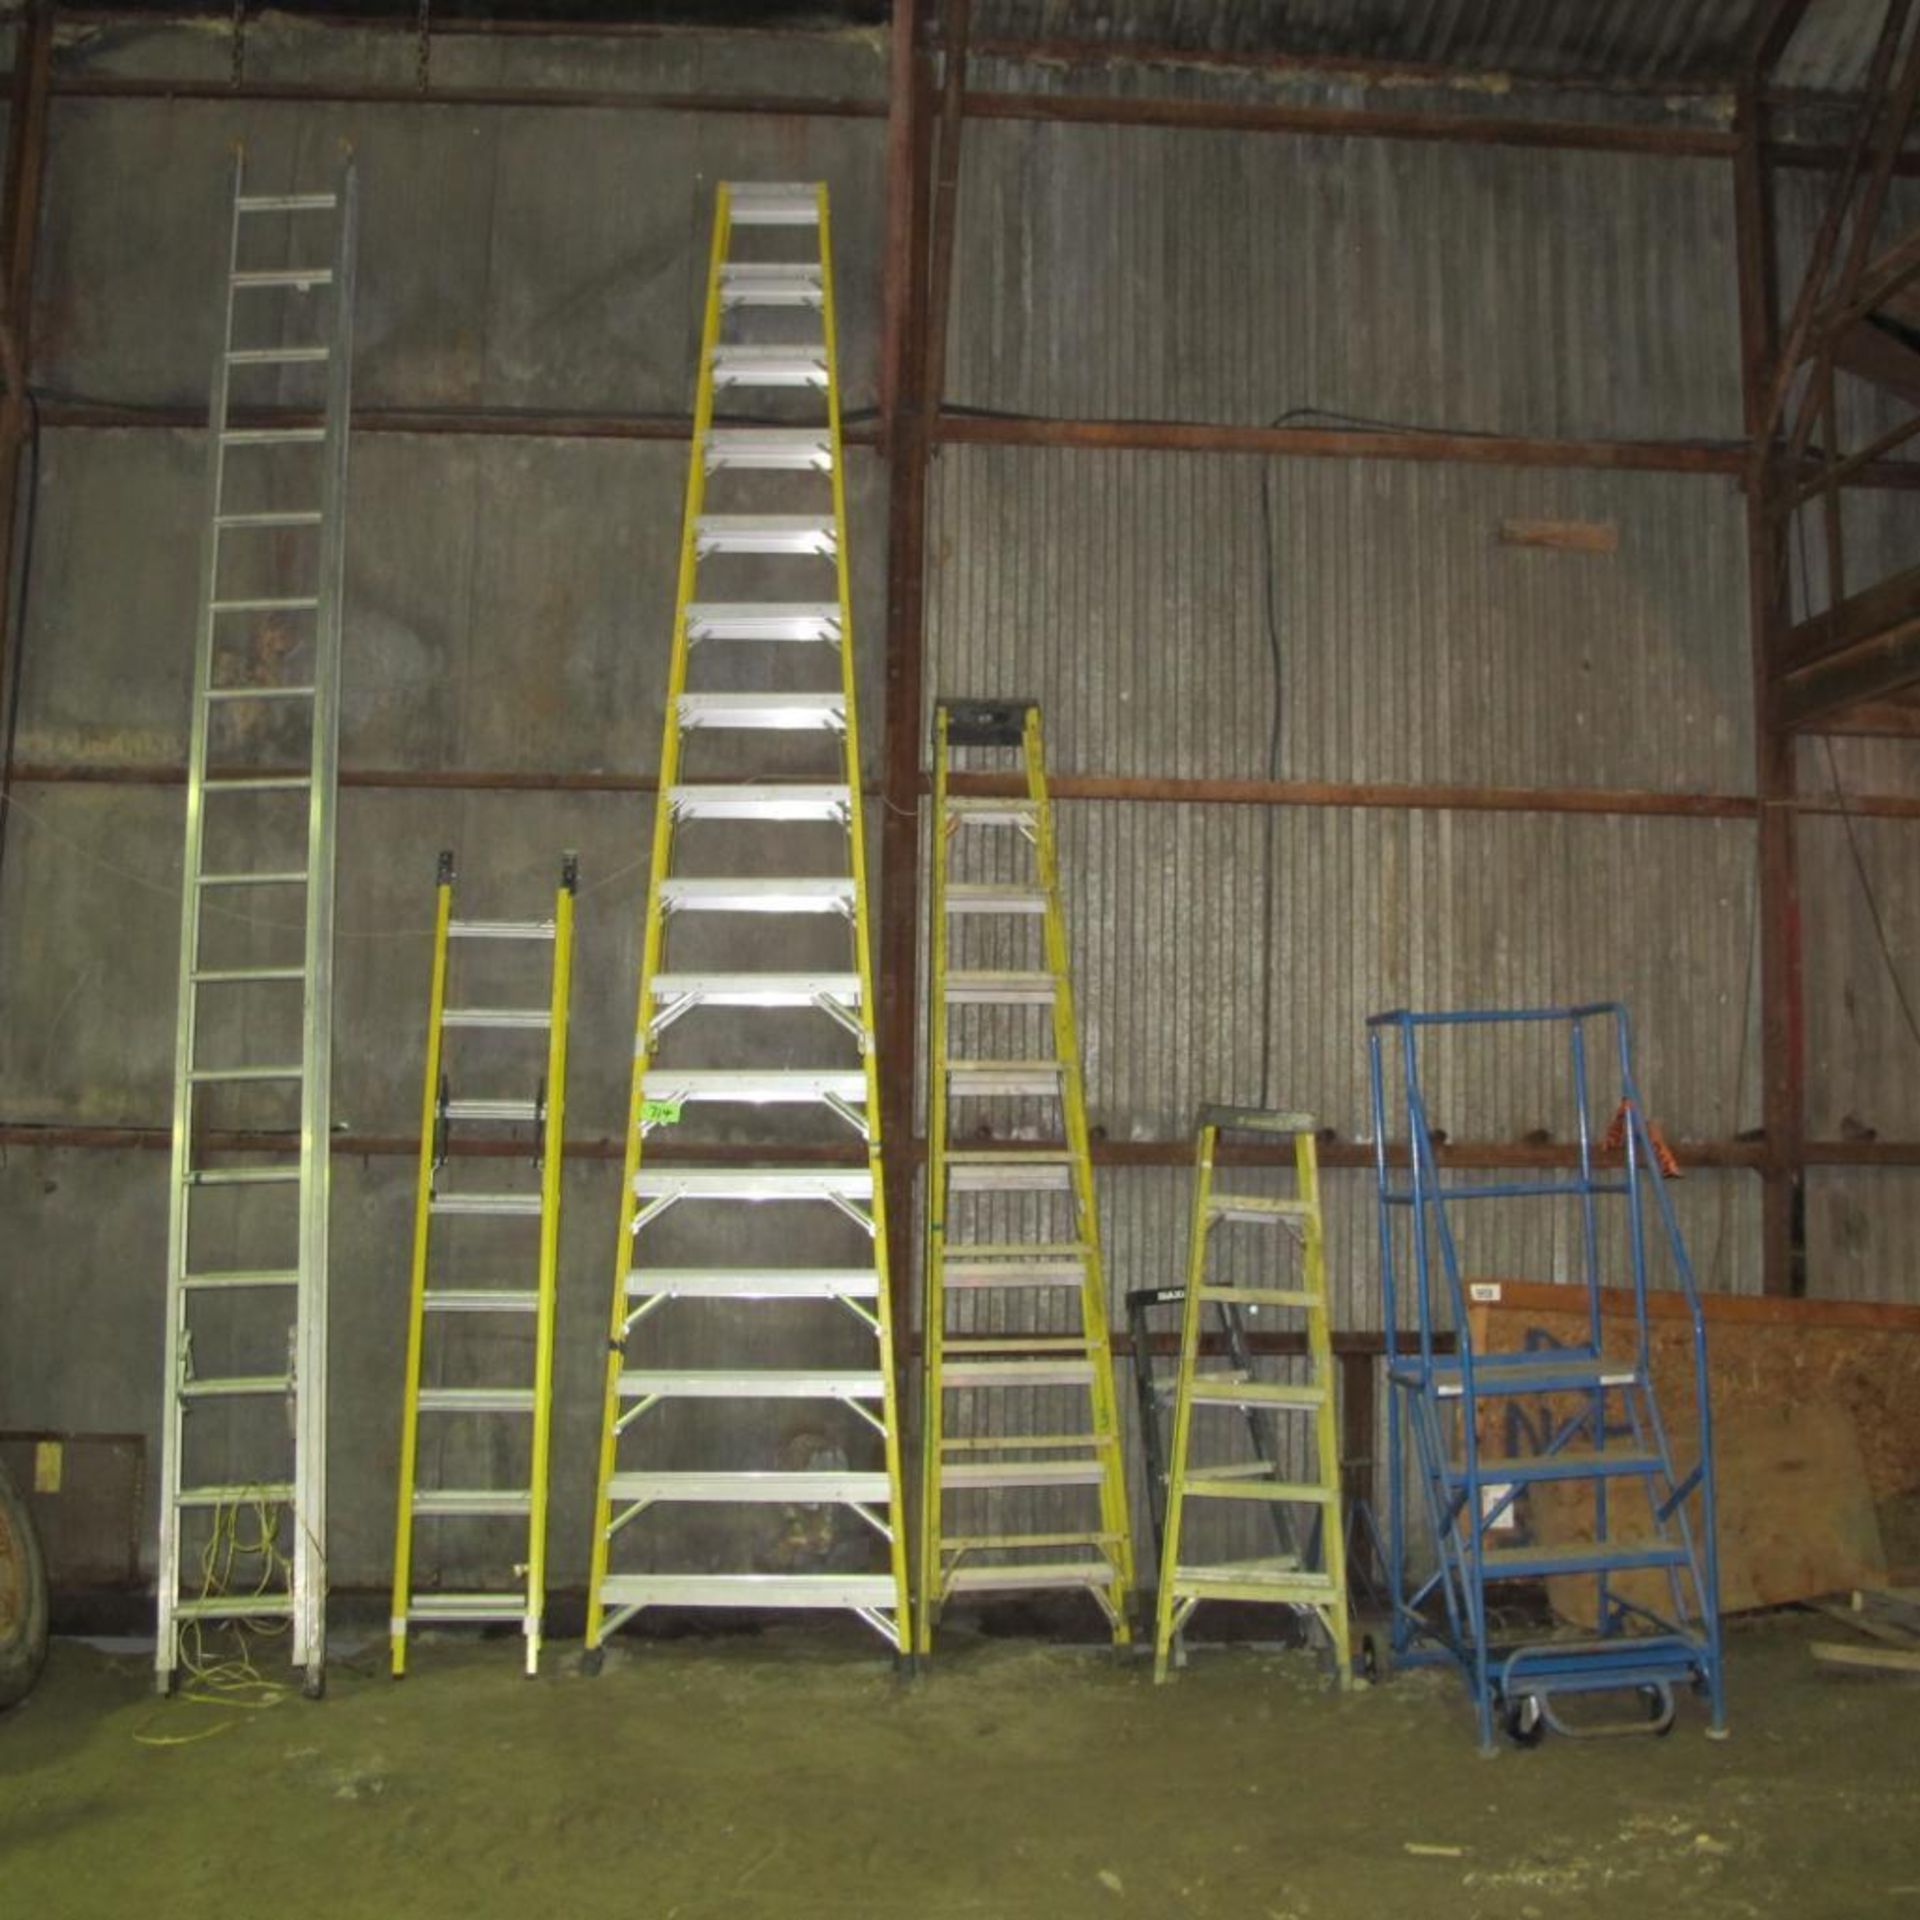 LOT OF 7 LADDERS, 16', 32' EXTENSION, 16' EXREURION, 10', 2 - 6', 4') AND CANWAY 4 STEP WAREHOUSE ST